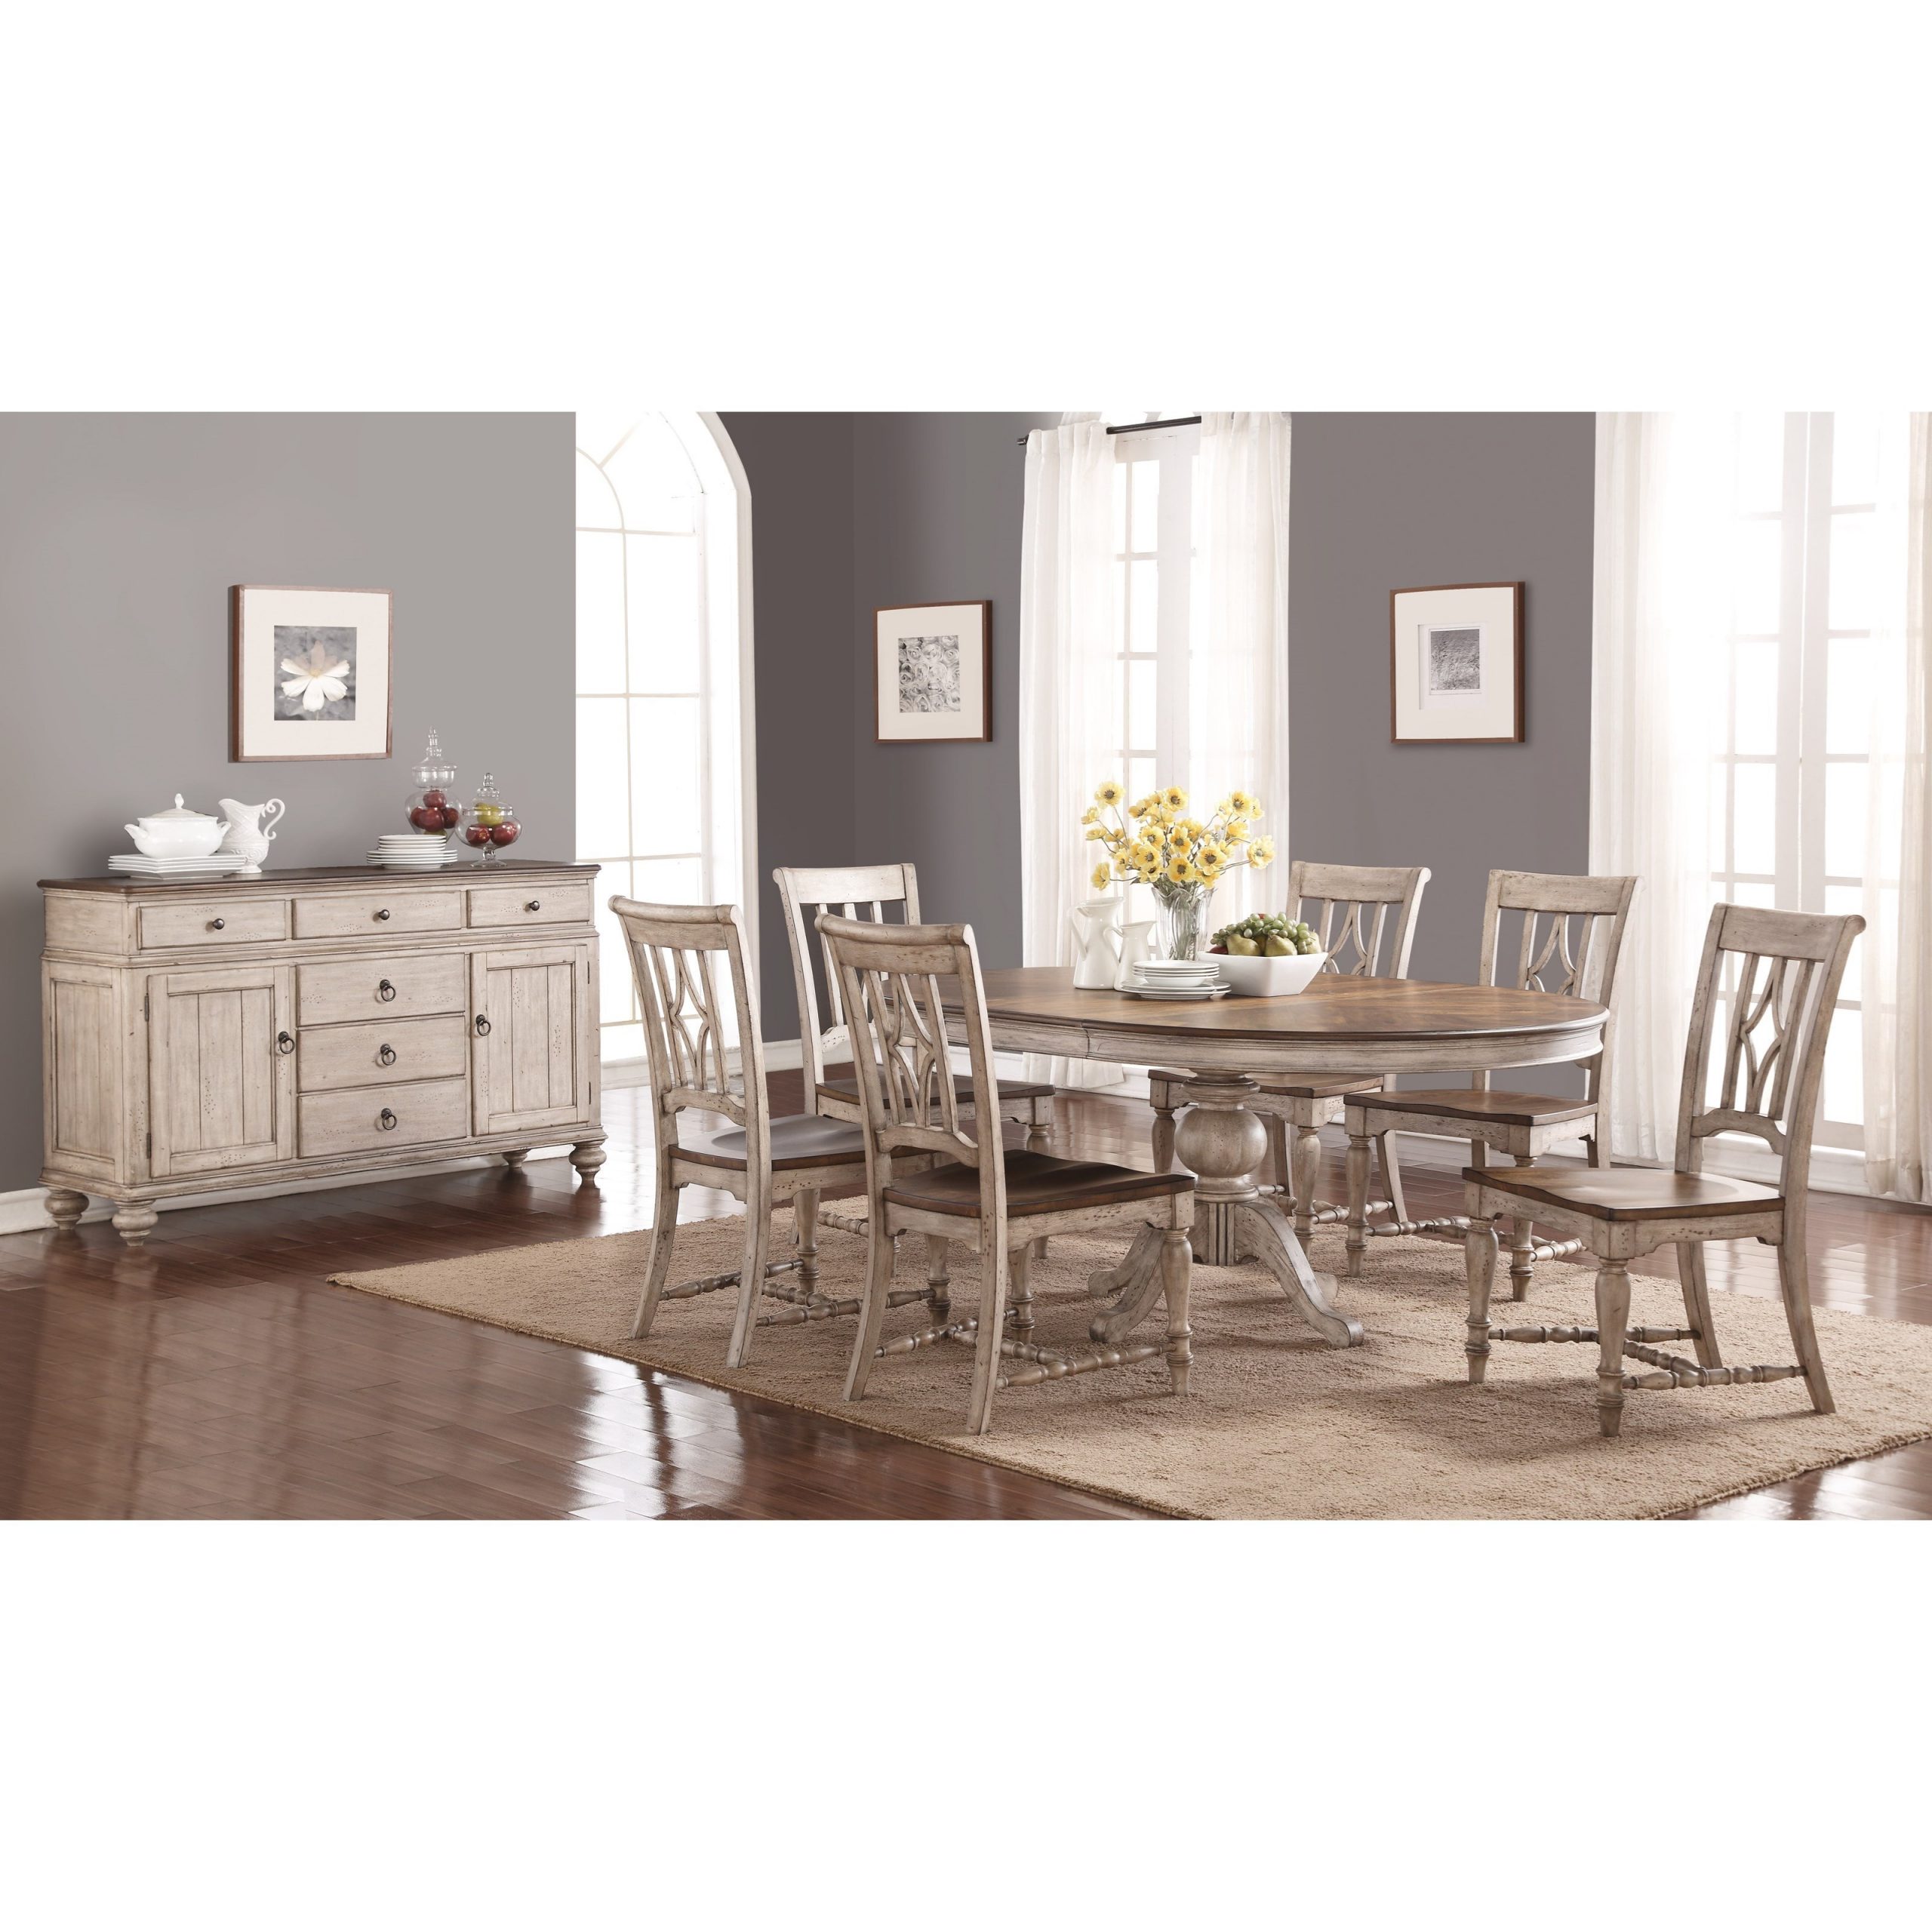 Flexsteel Wynwood Collection Plymouth Dining Room Group in measurements 3200 X 3200